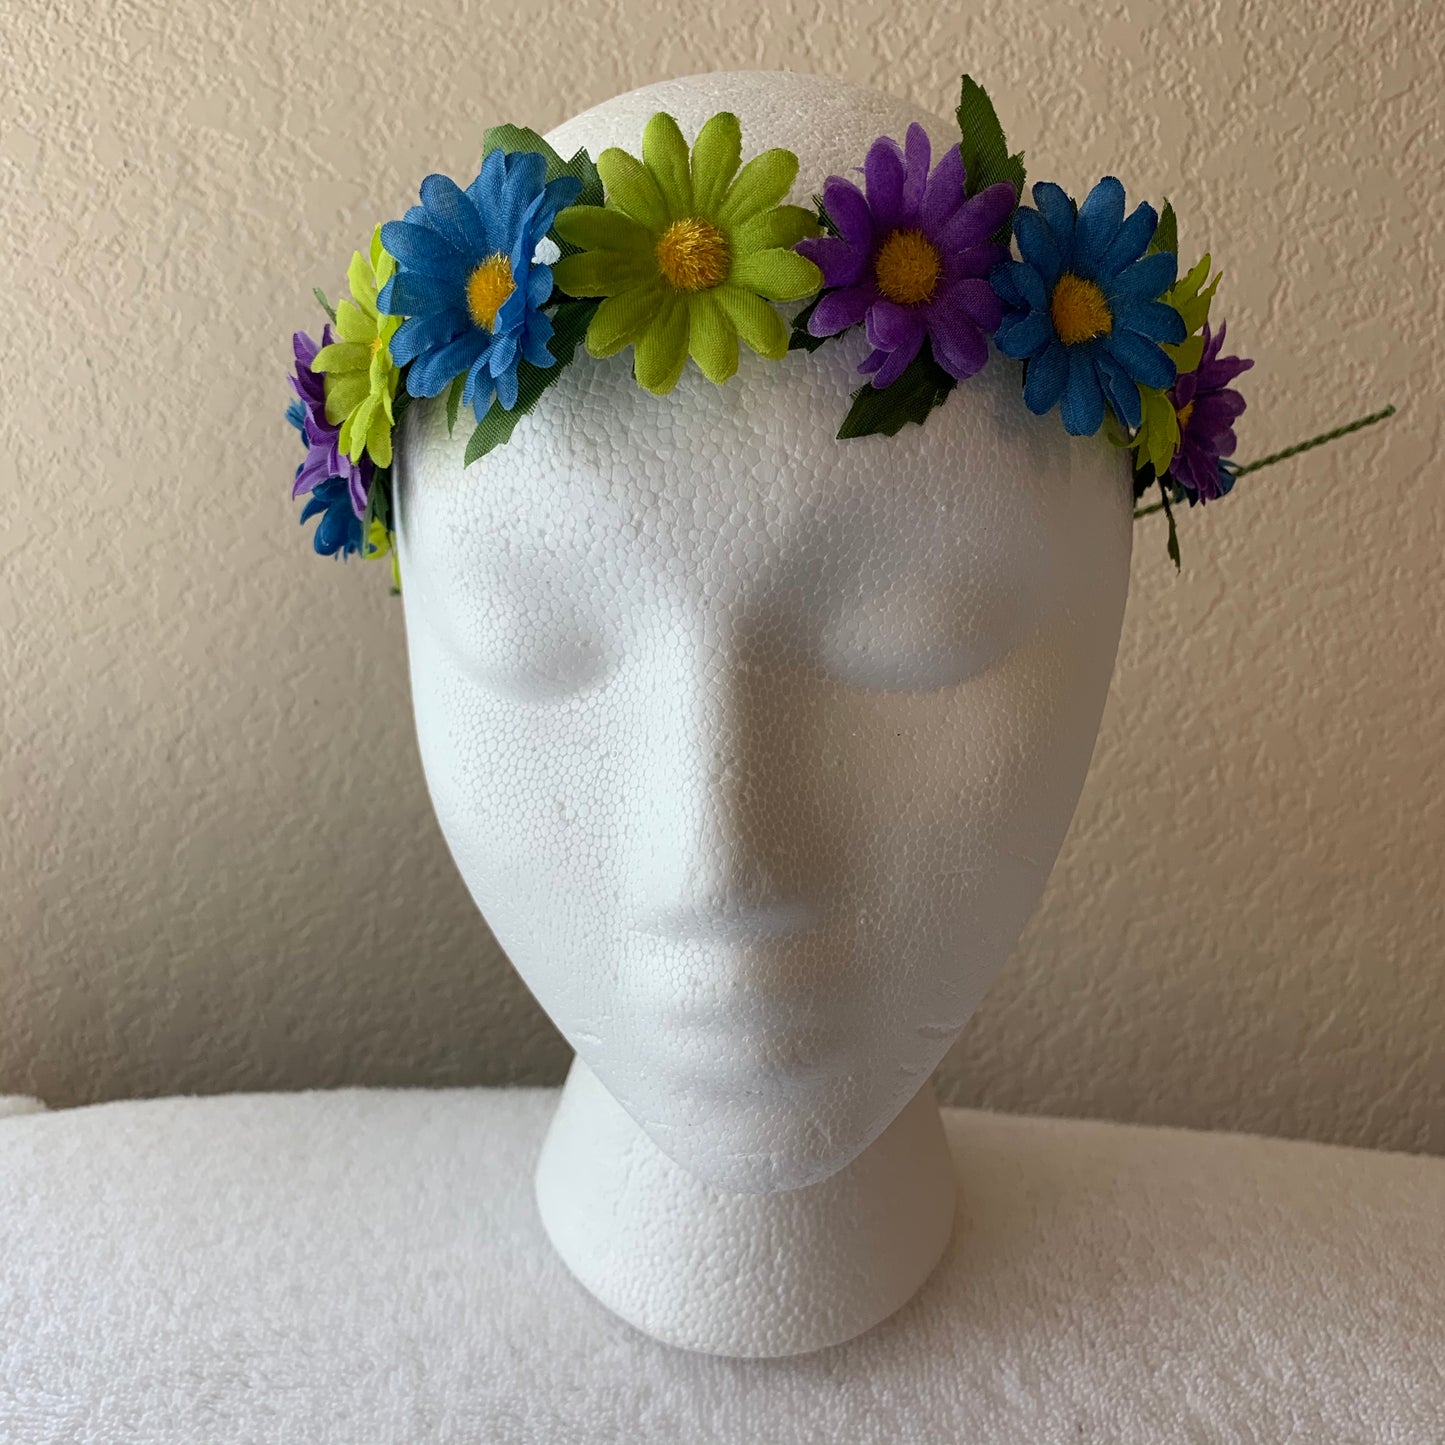 Extra Small Wreath - Lime Green, Dark Blue, and Purple Daisies